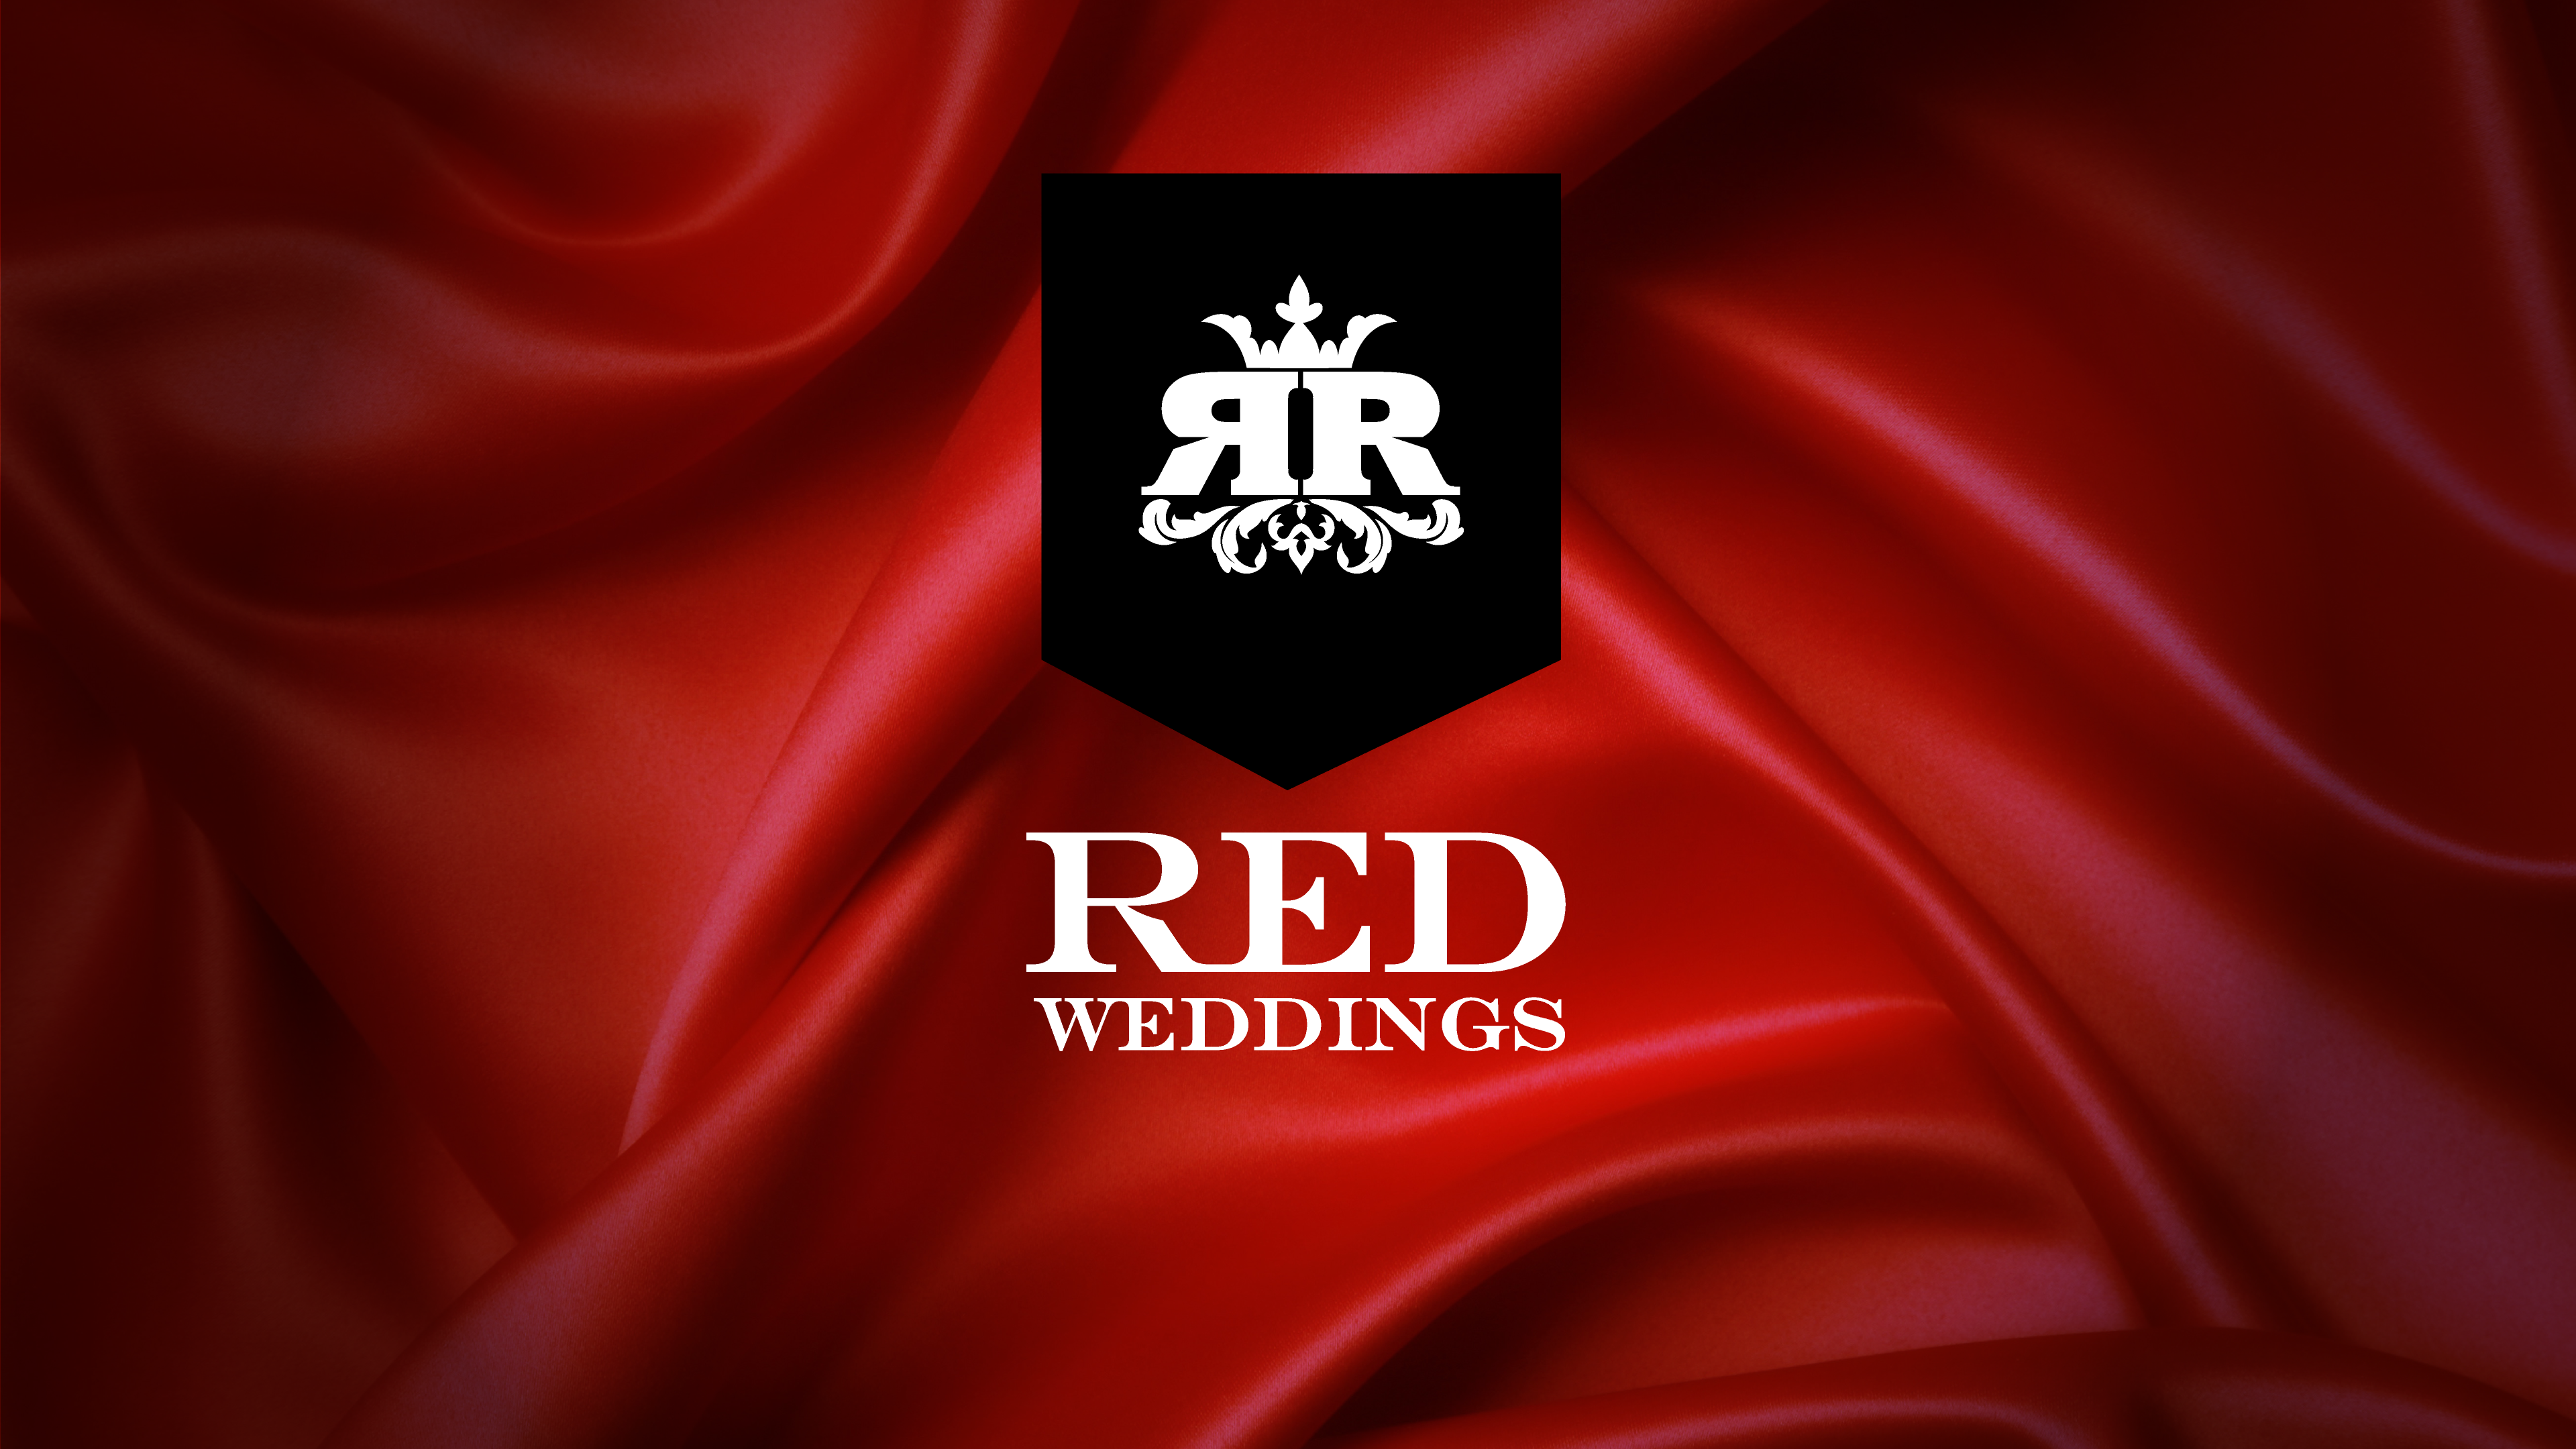 Wedding photography videography drone & DJ services – RED weddings Chicago